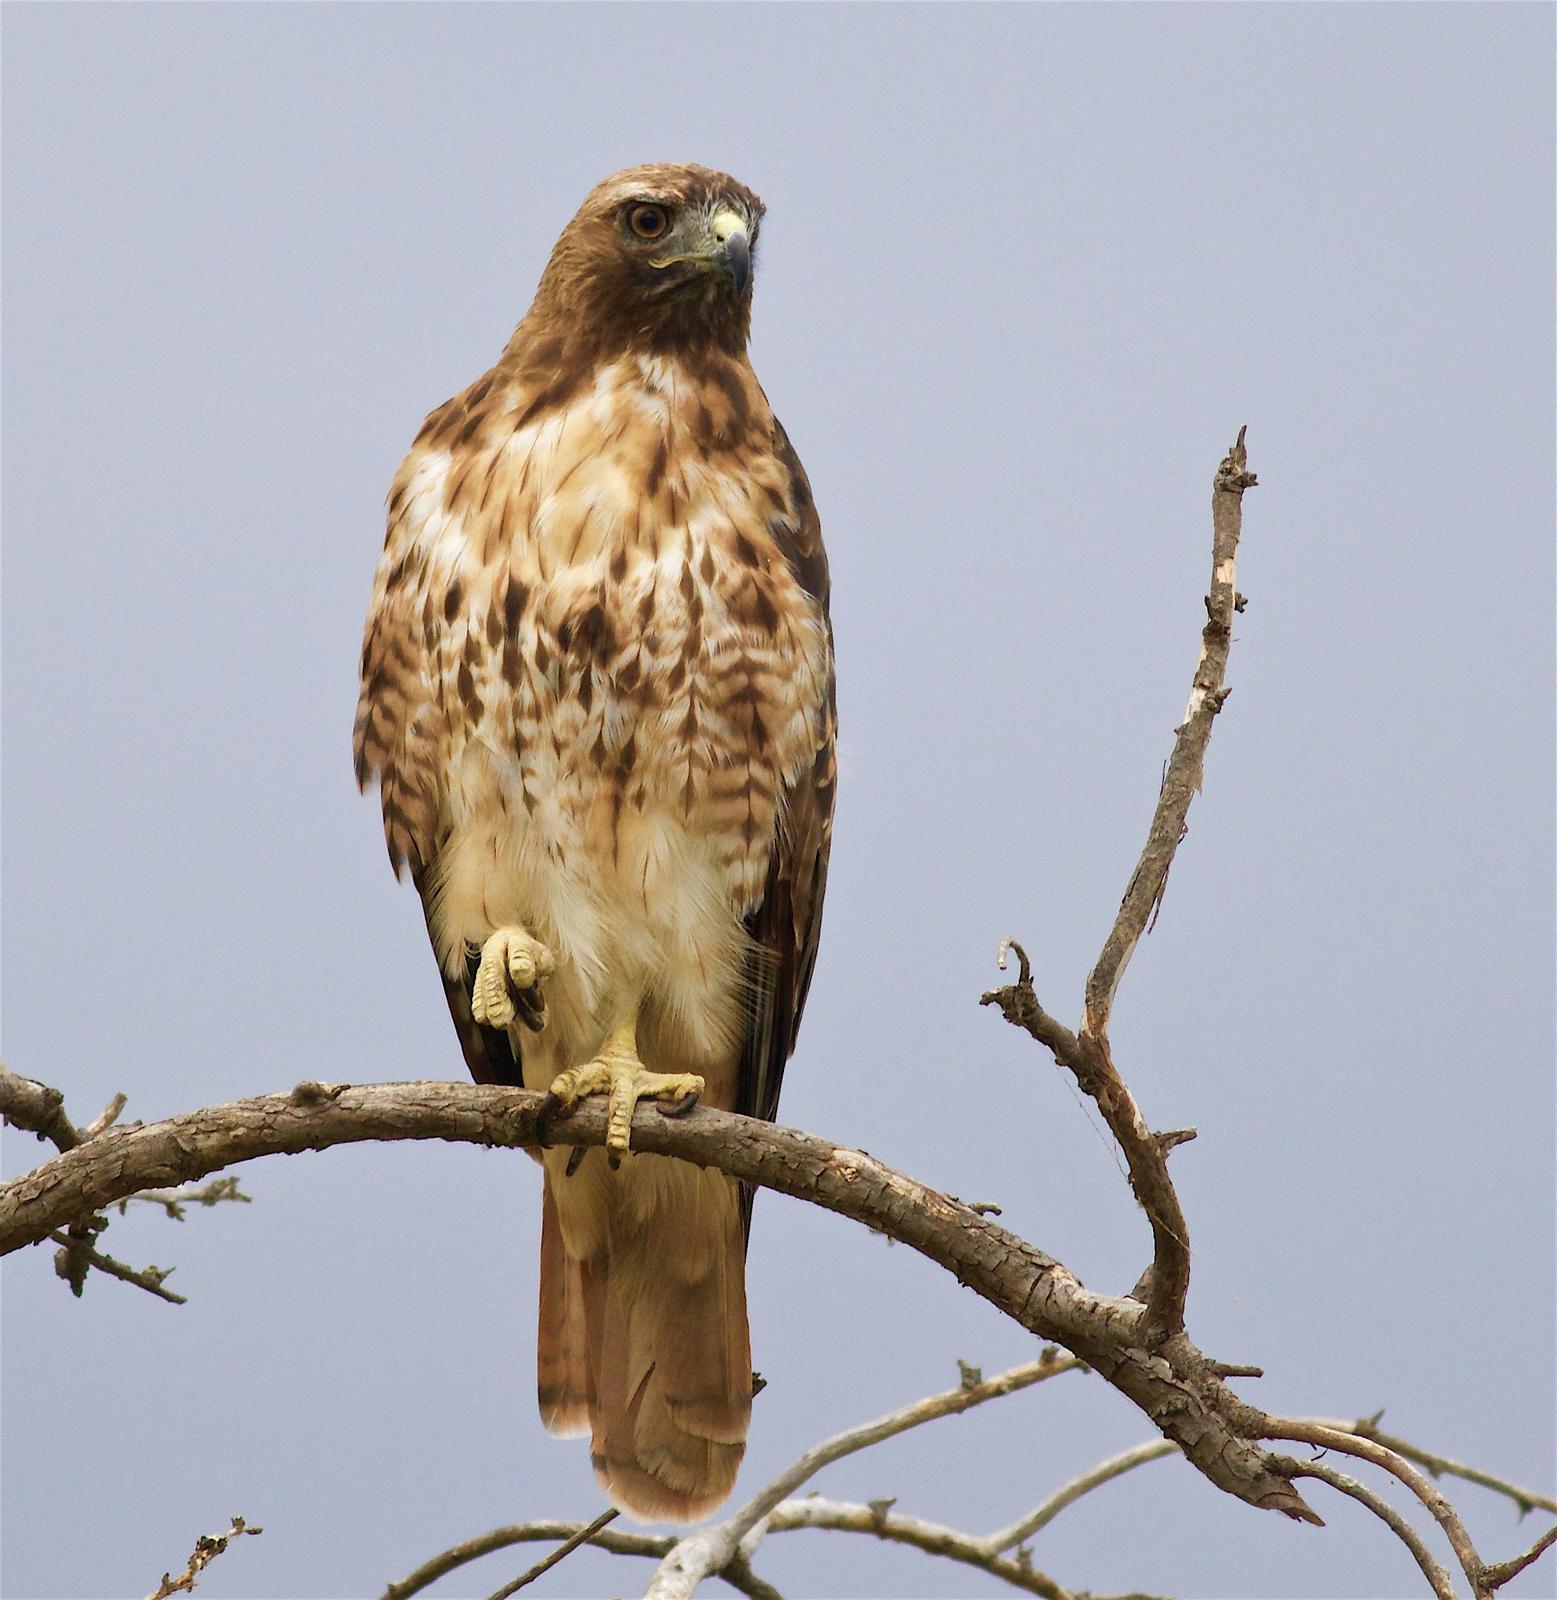 Red-tailed Hawk Photo by Kathryn Keith